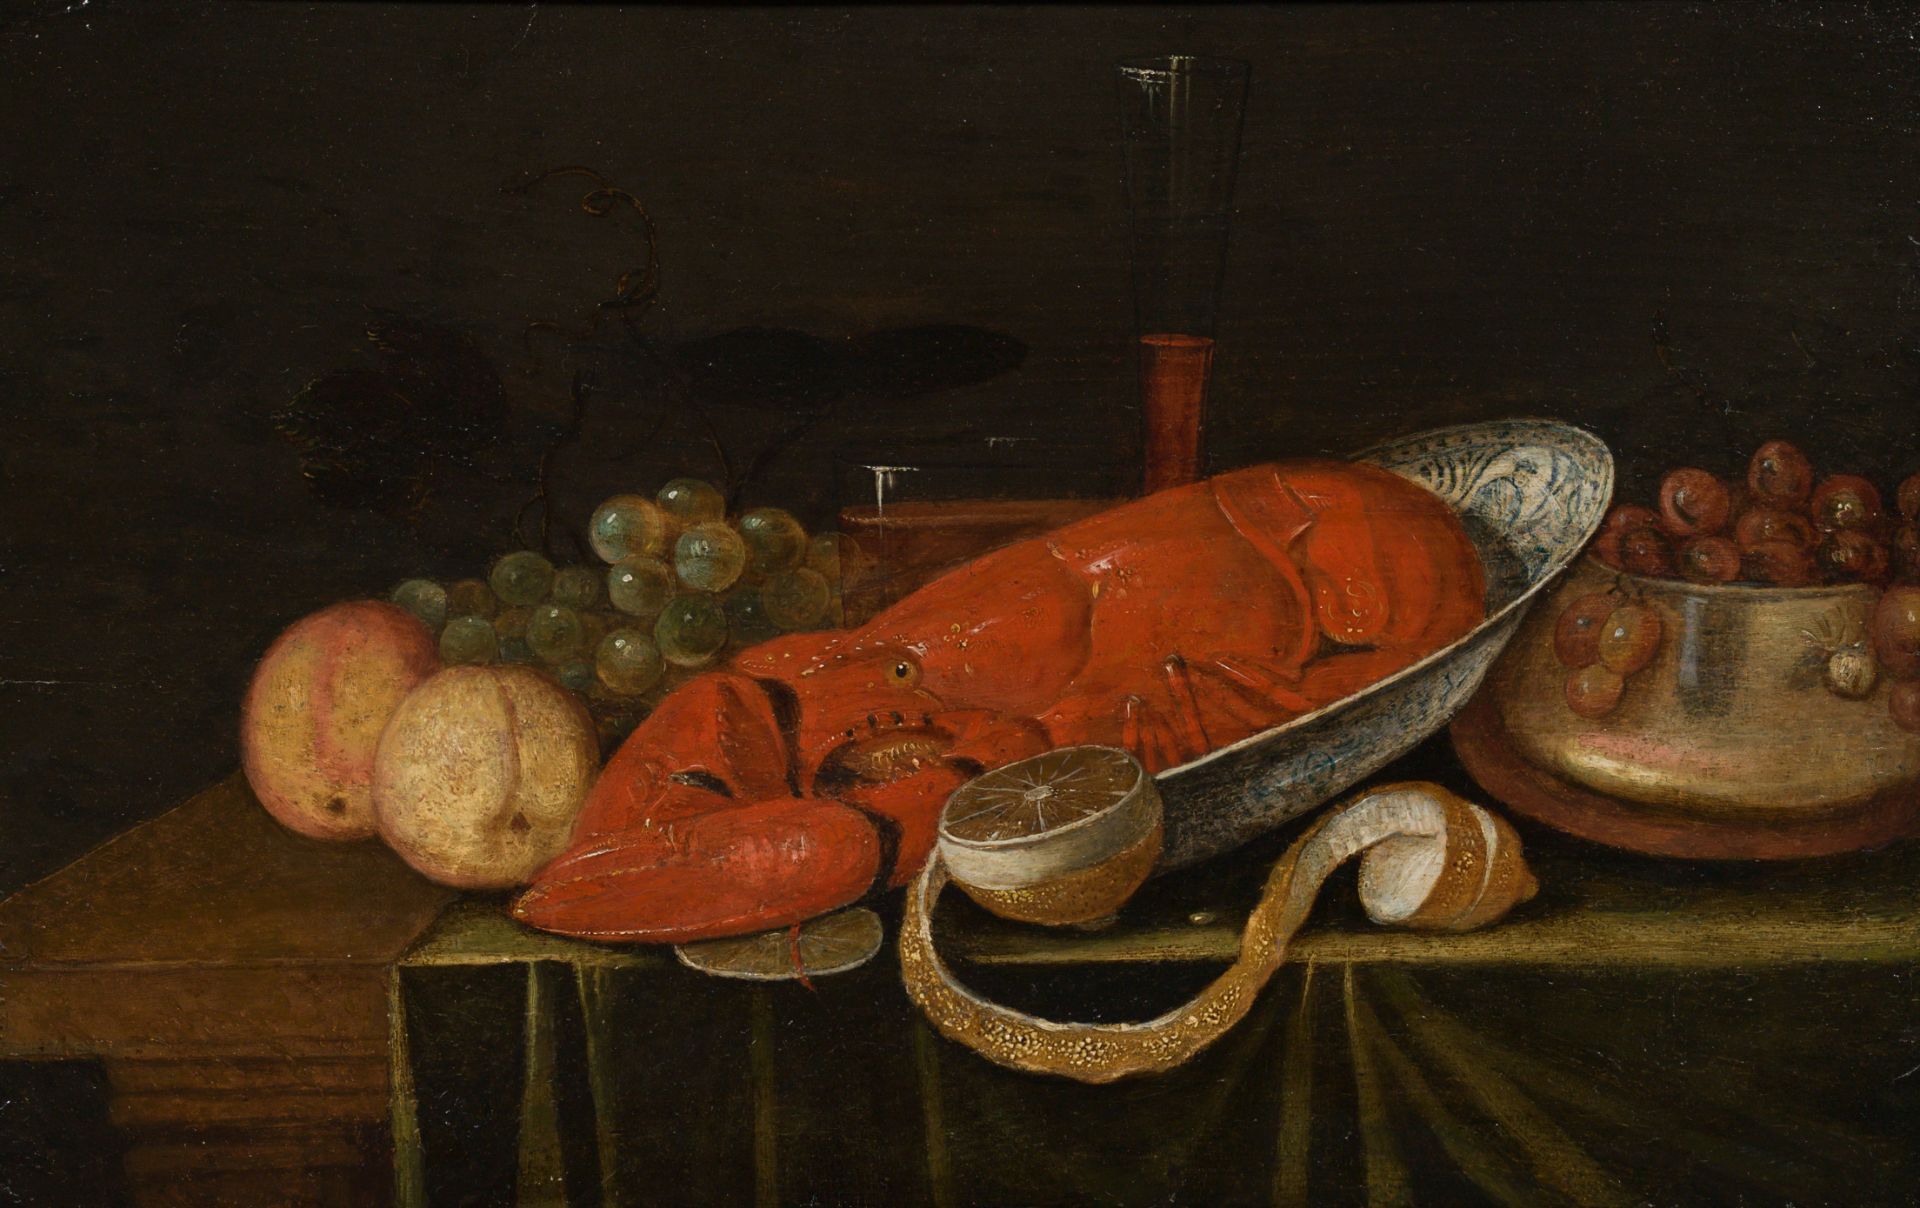 Artist of the 17th century: Still Life with Lobster